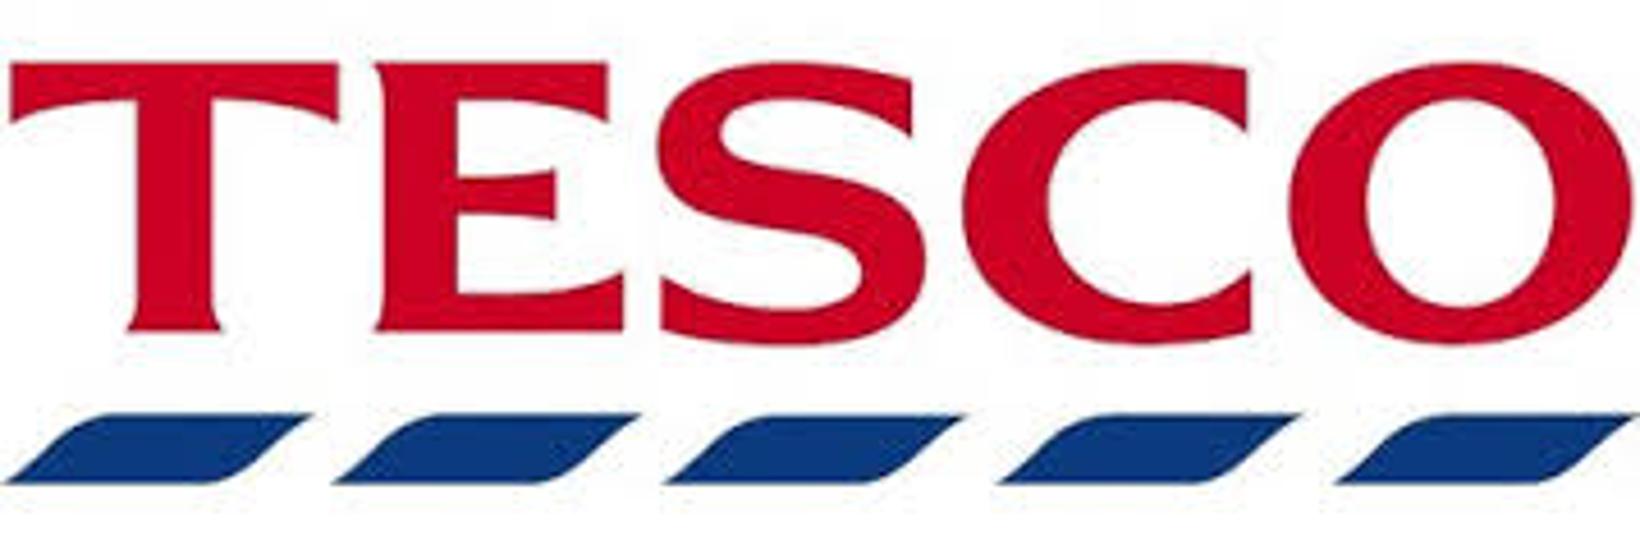 Tesco Hungary: Central Europe - The Region Of The  Generous